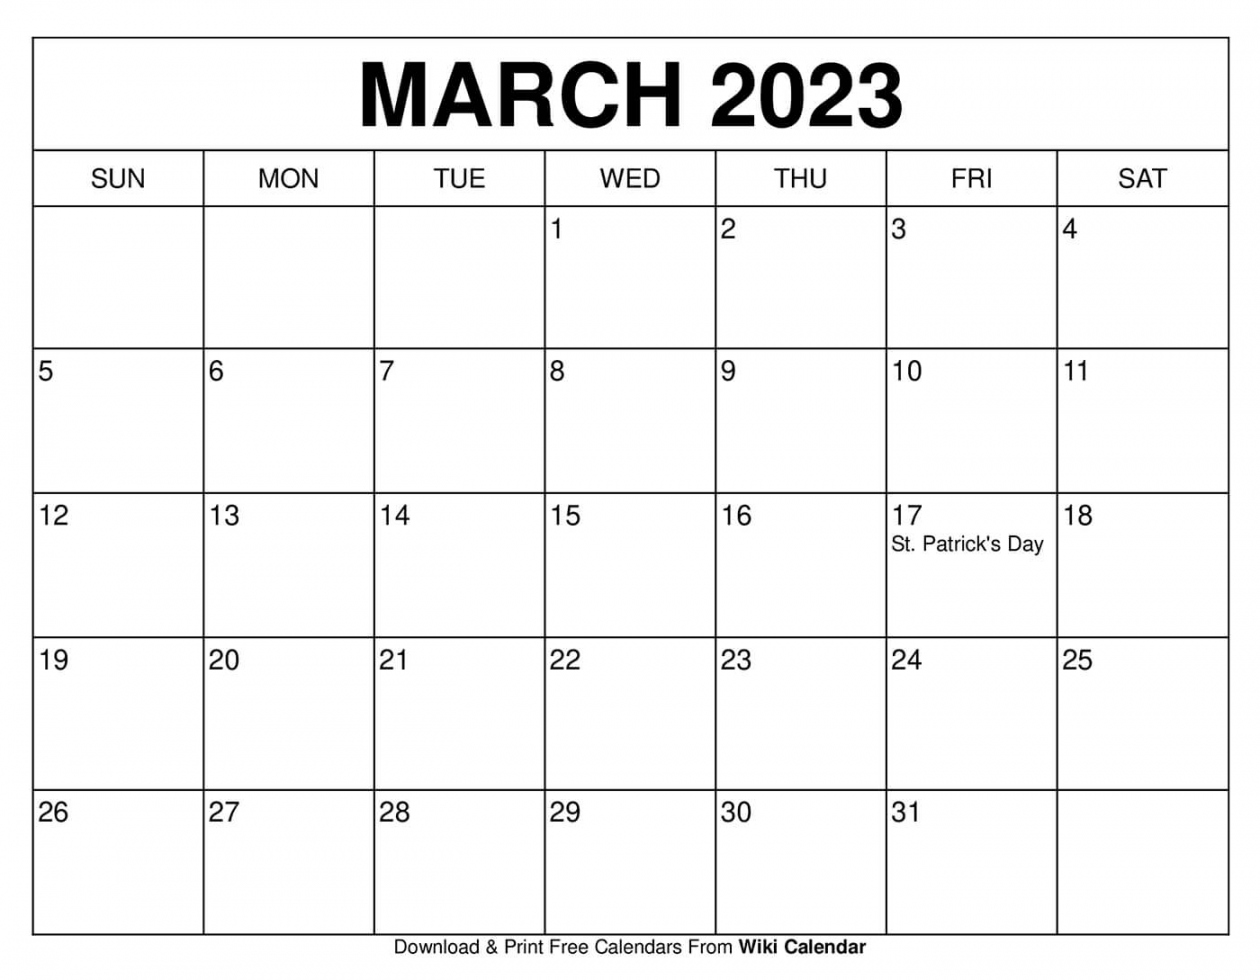 2023 Calendar Printable Free - Printable - Free Printable March  Calendar Templates With Holidays